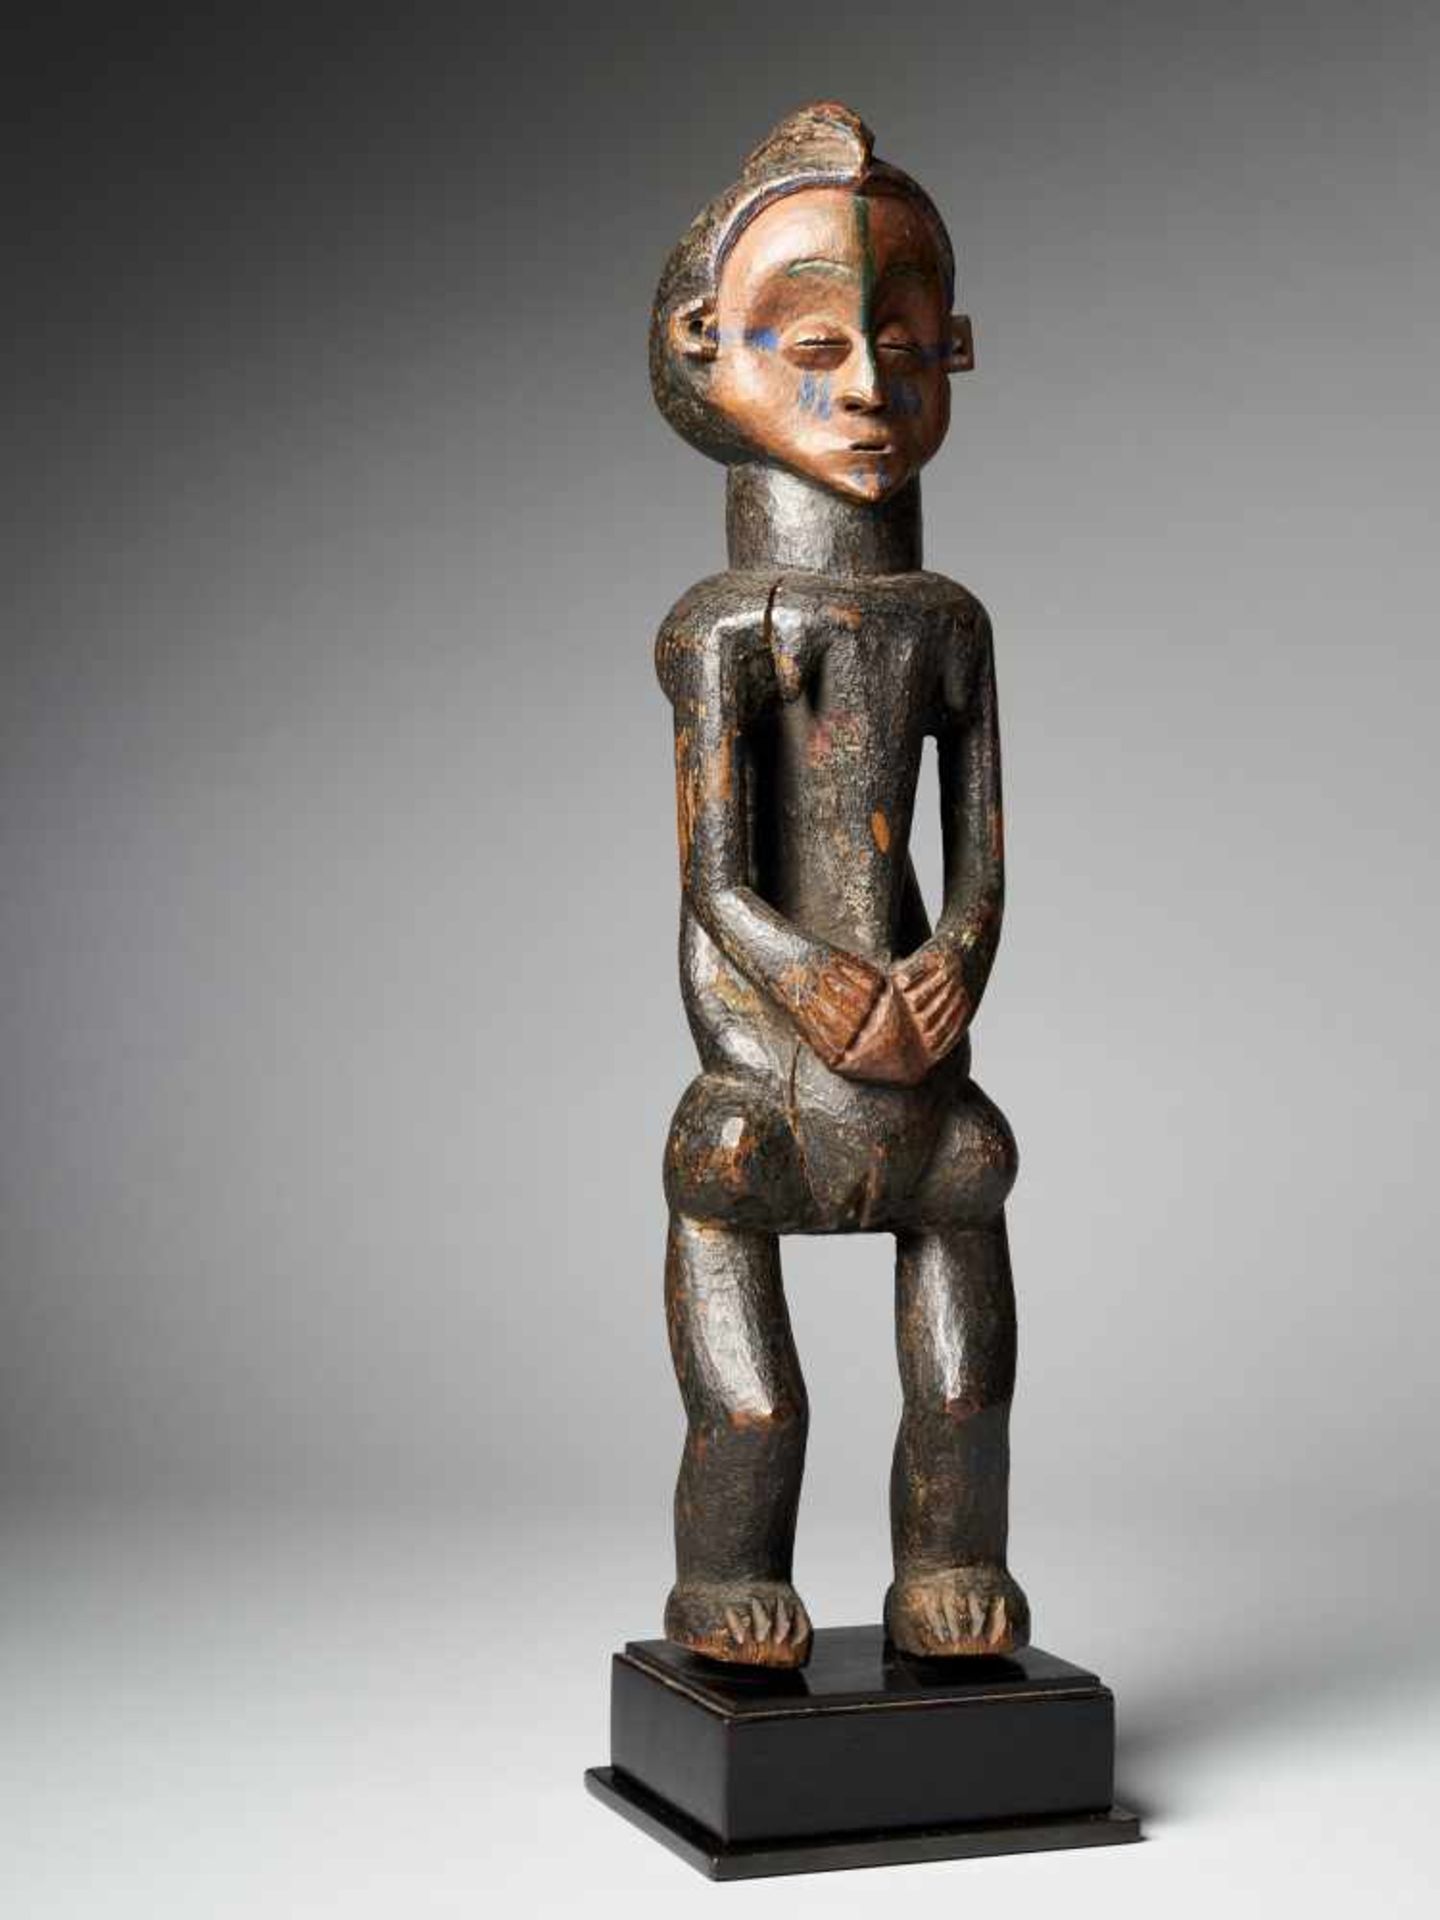 Female Holo statue 'Mvunzi' with traces of Polychrome - Tribal ArtThe Cult statue Mvunzi, represents - Image 6 of 6